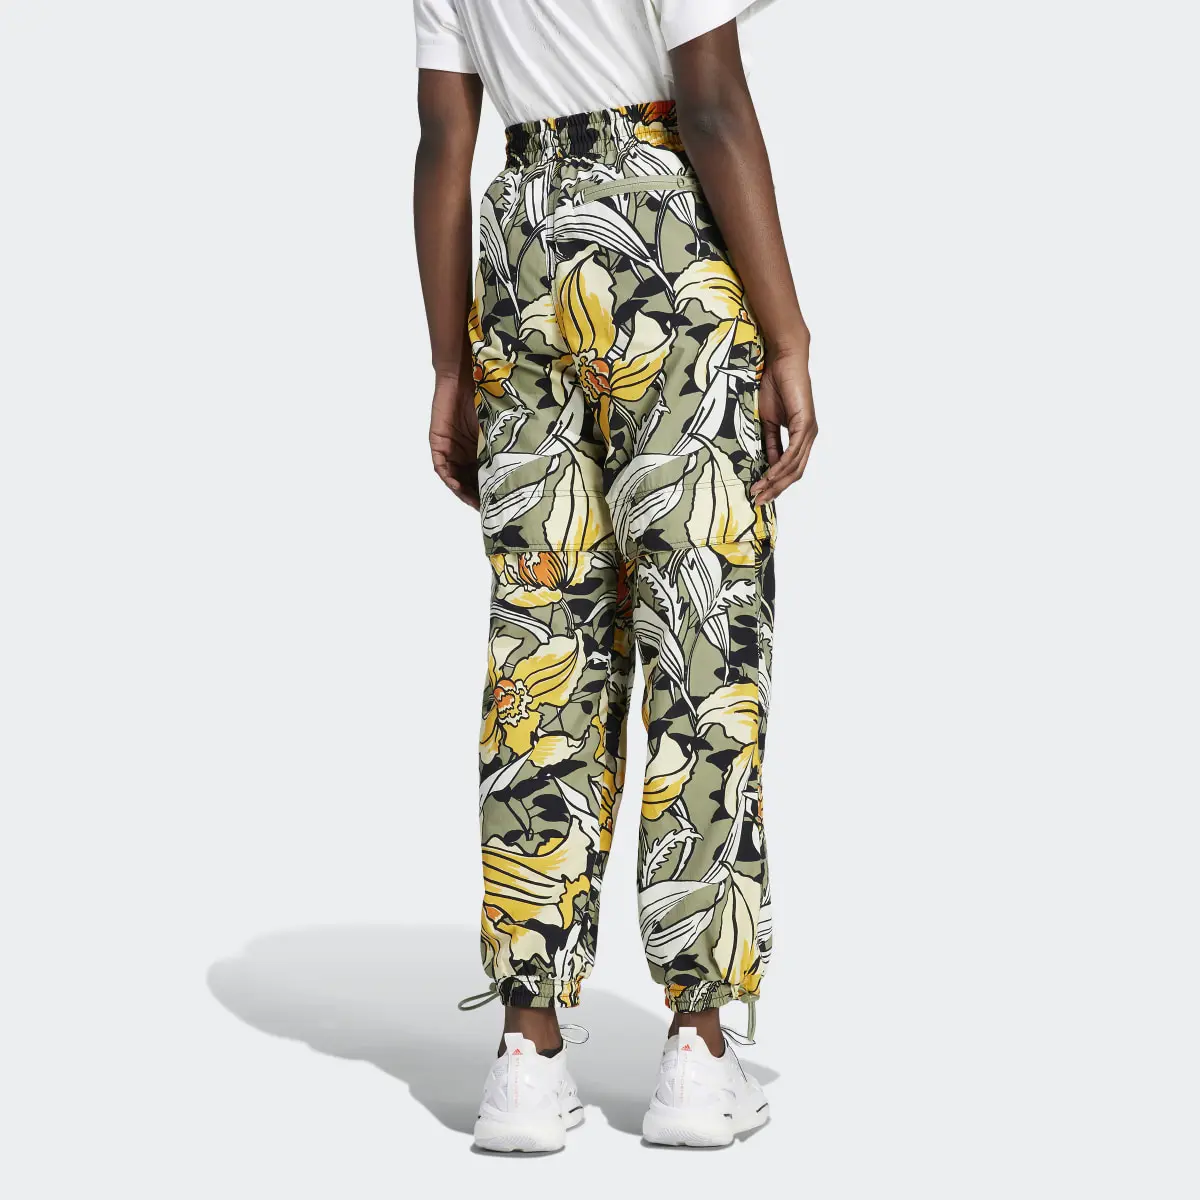 Adidas by Stella McCartney TrueCasuals Woven Printed Track Pants. 3